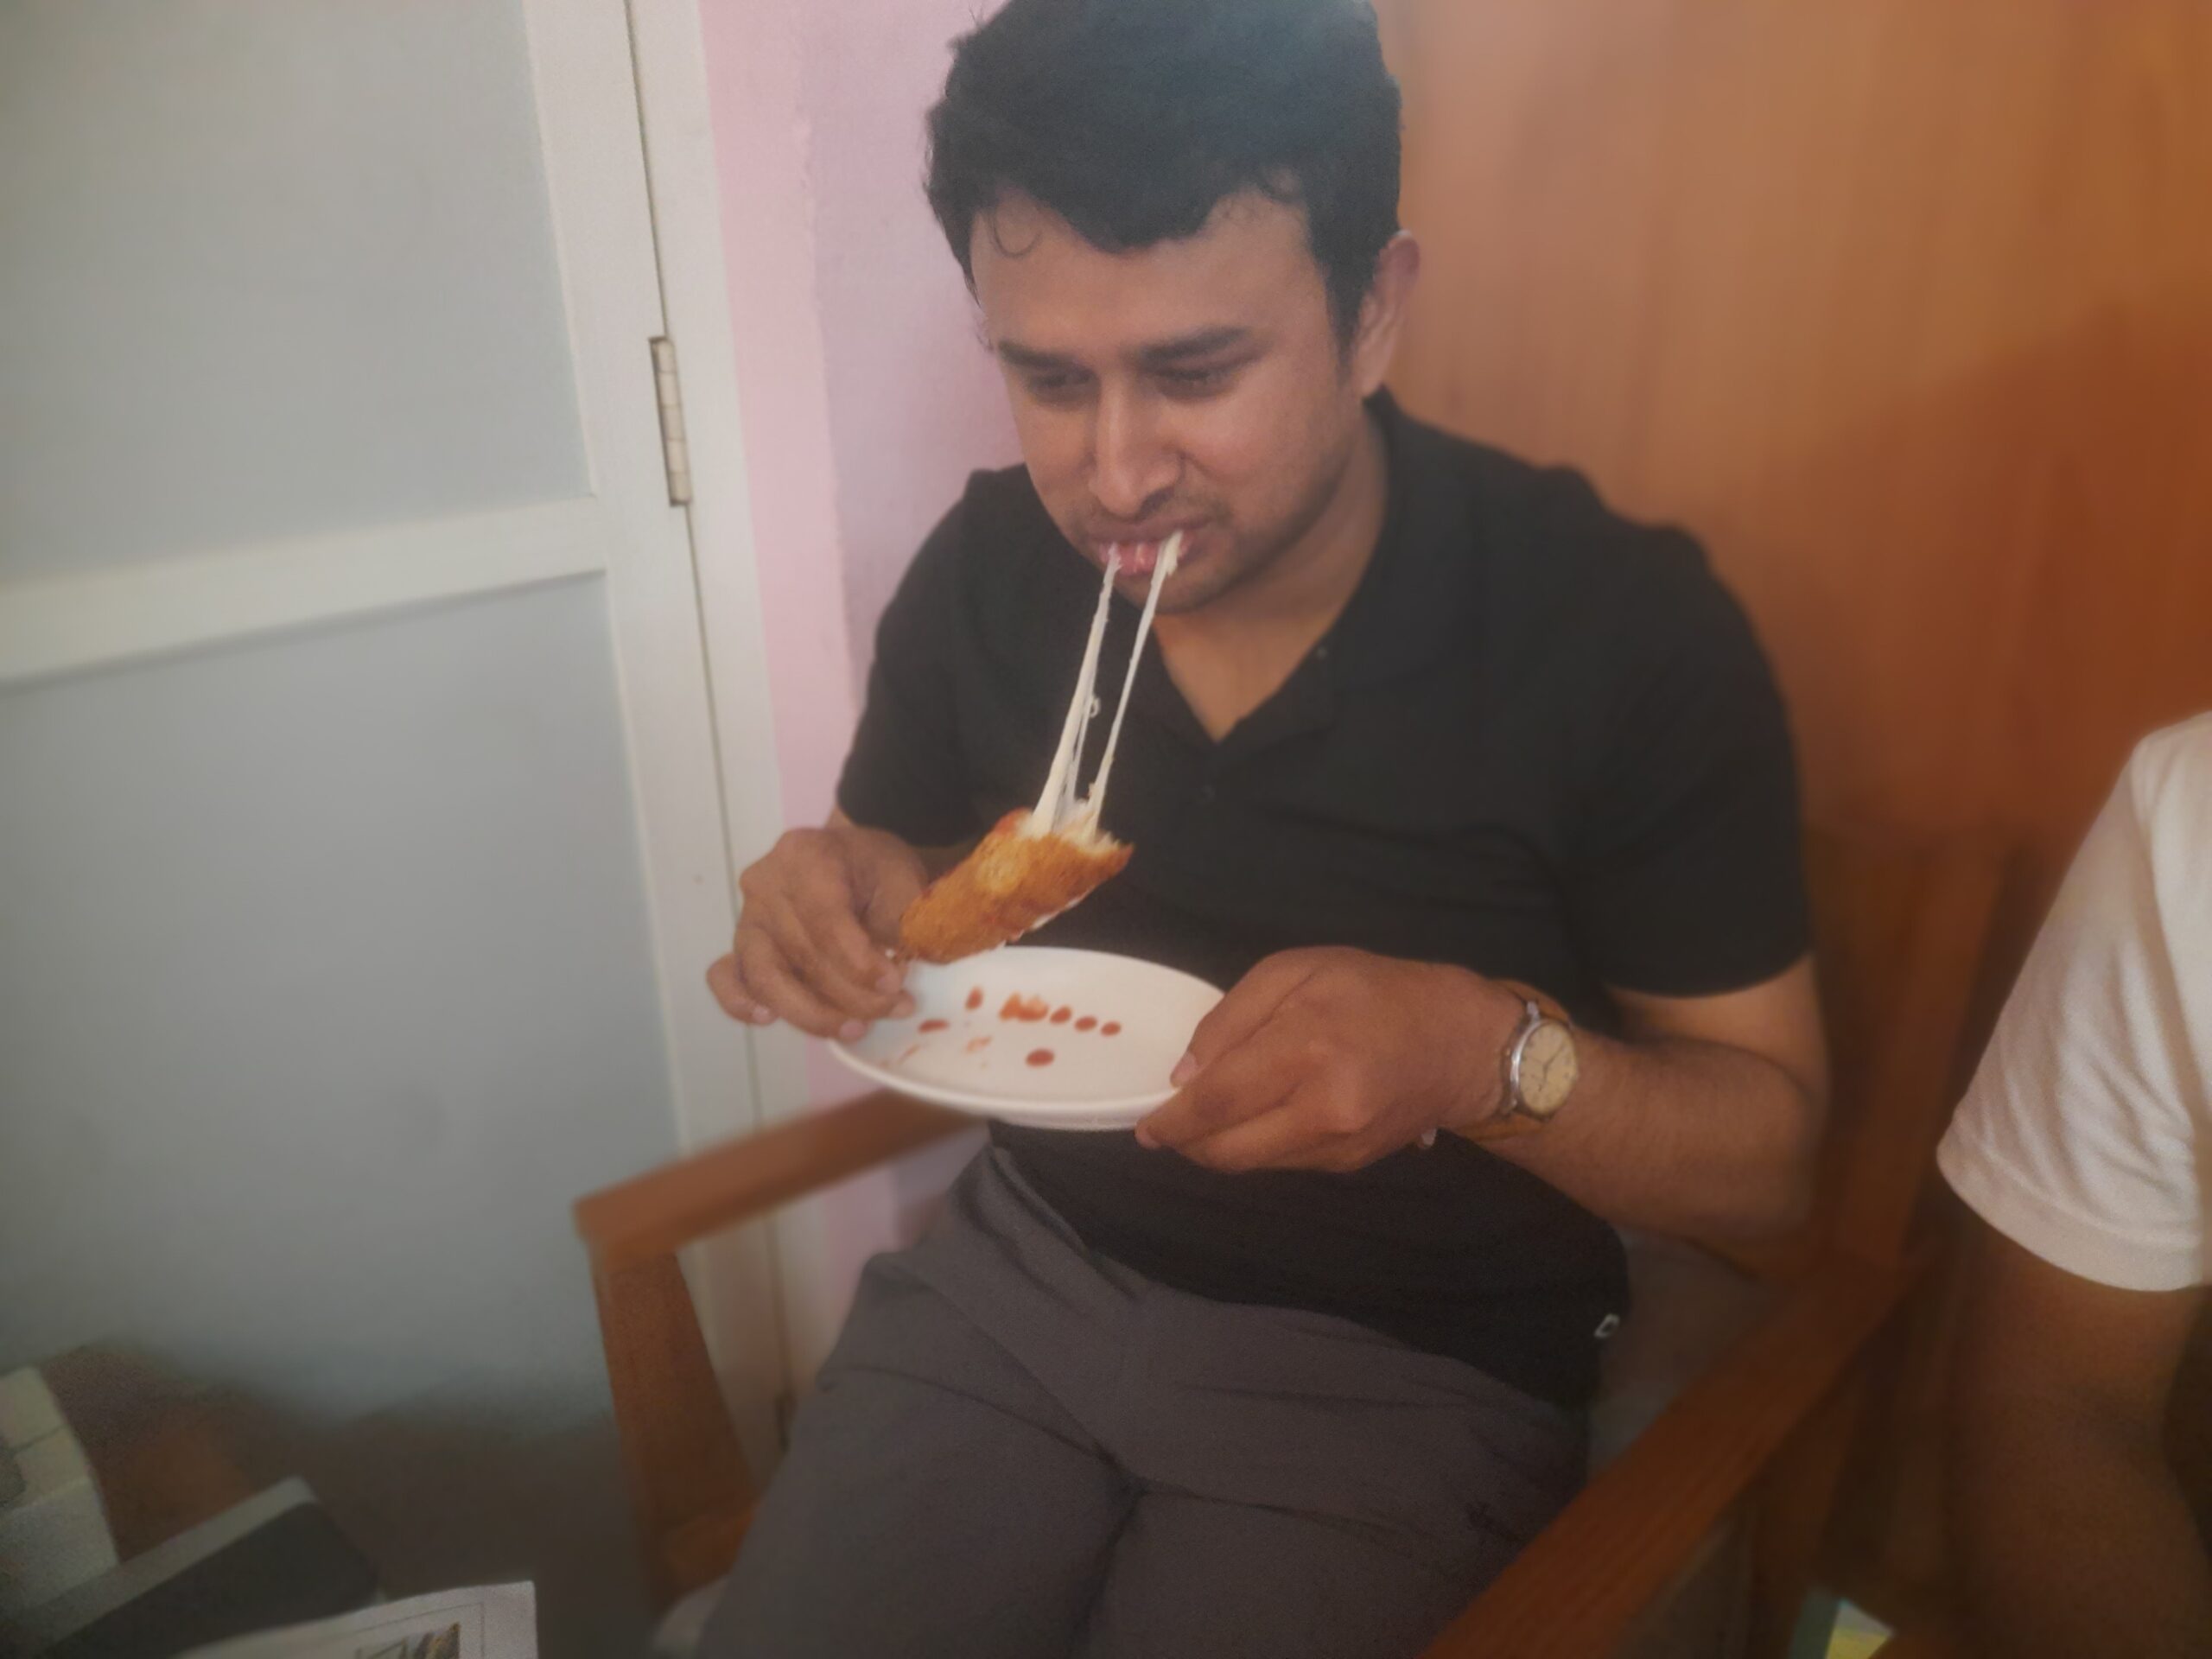 Our reputed guest enjoying with a Corndog